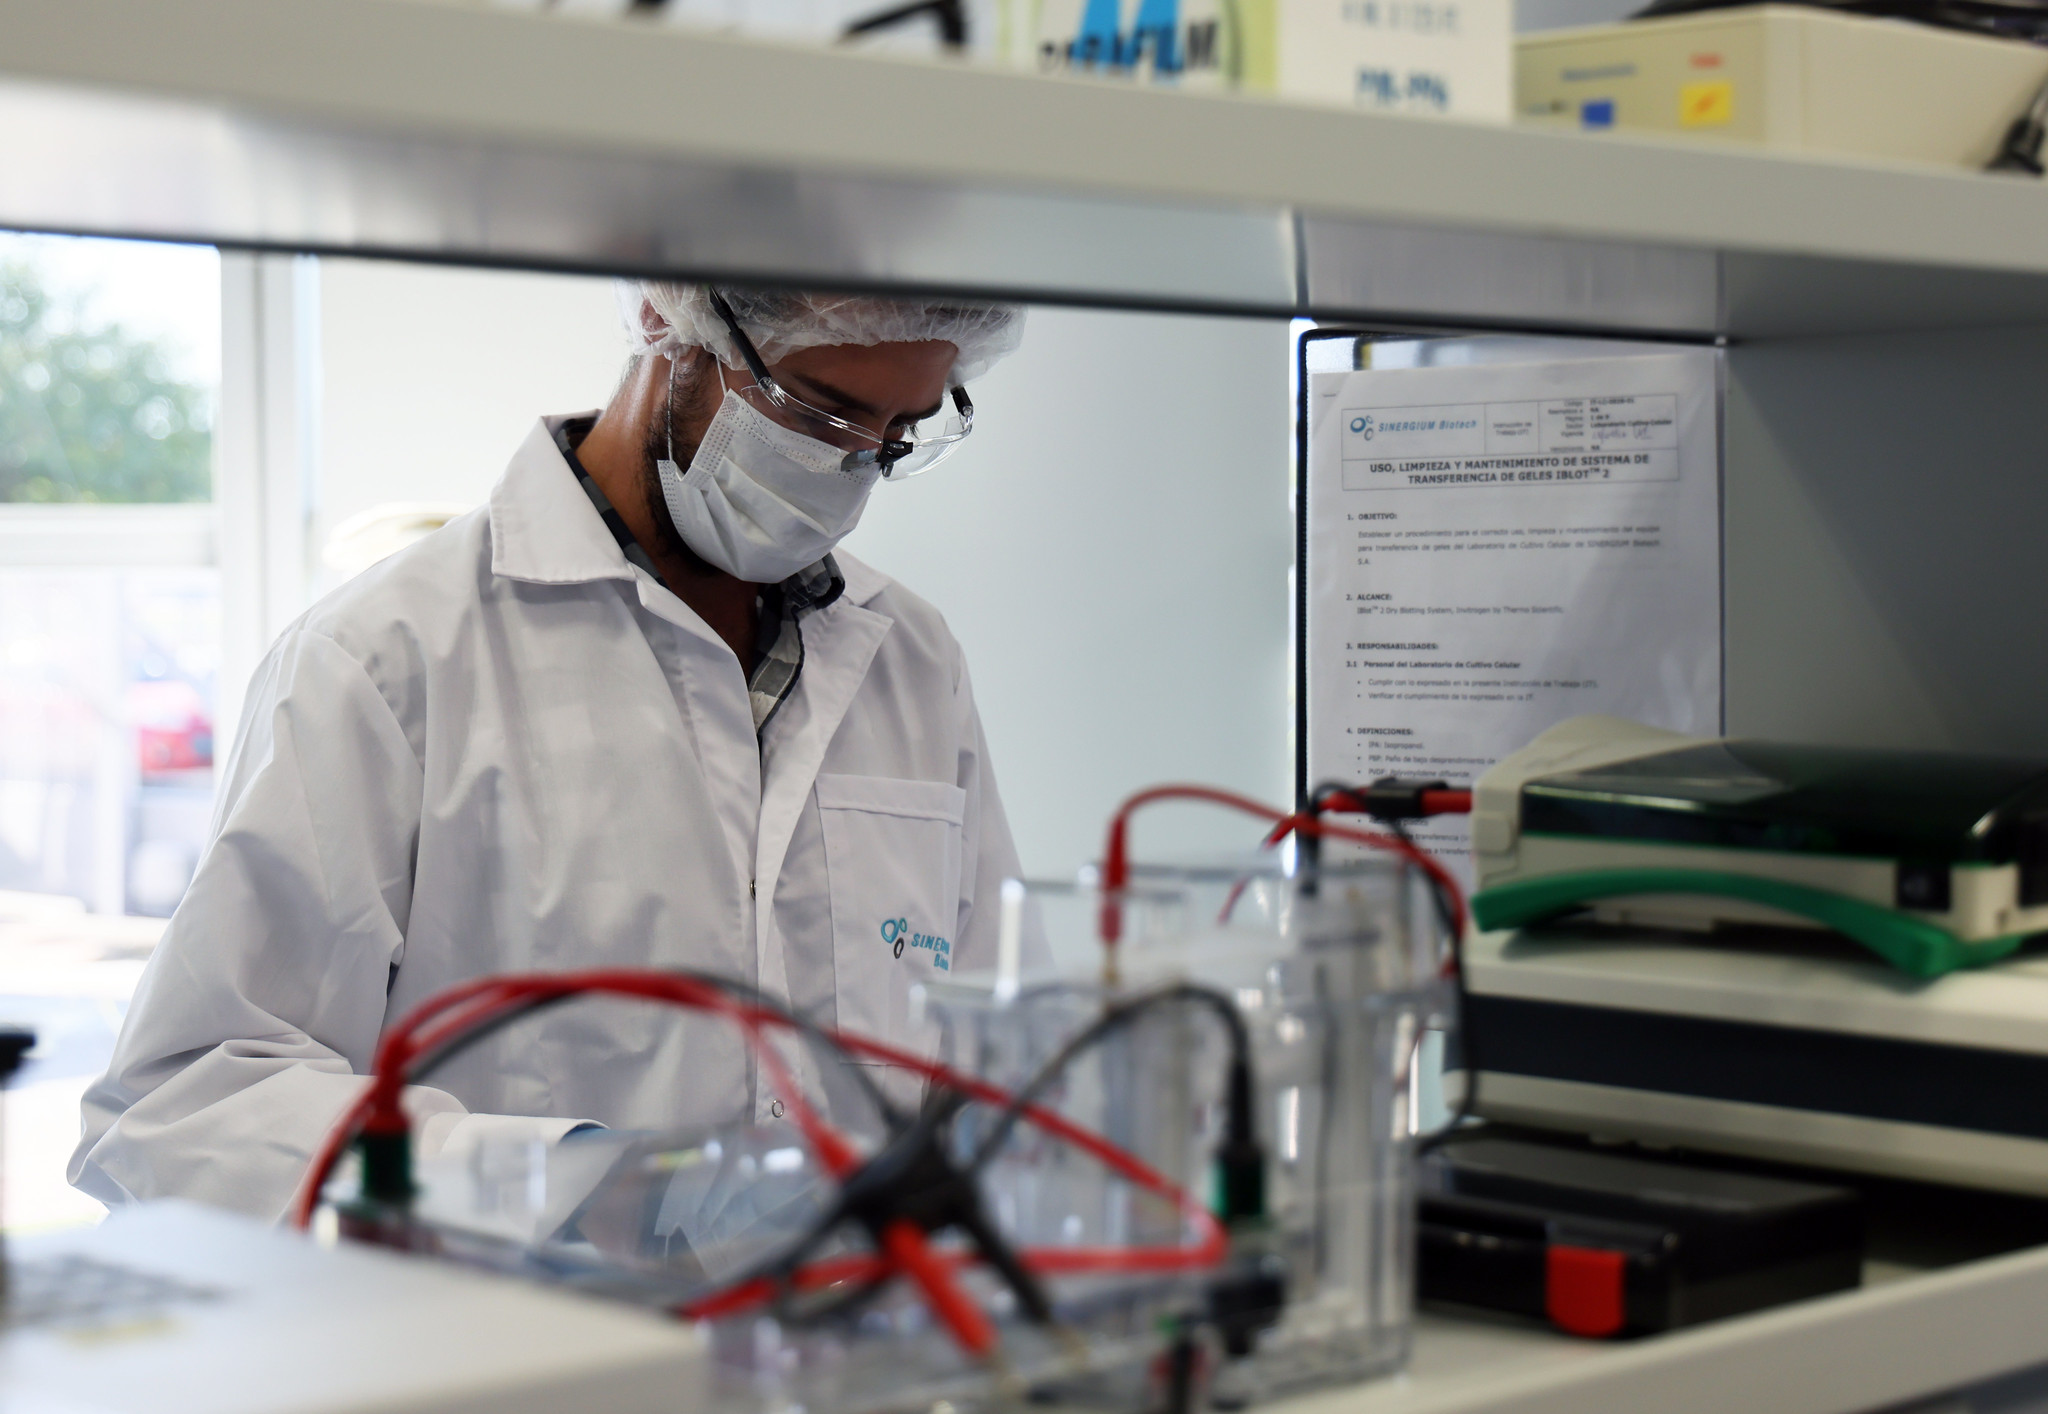 A person dressed in medical and protective clothing works in a medical lab.